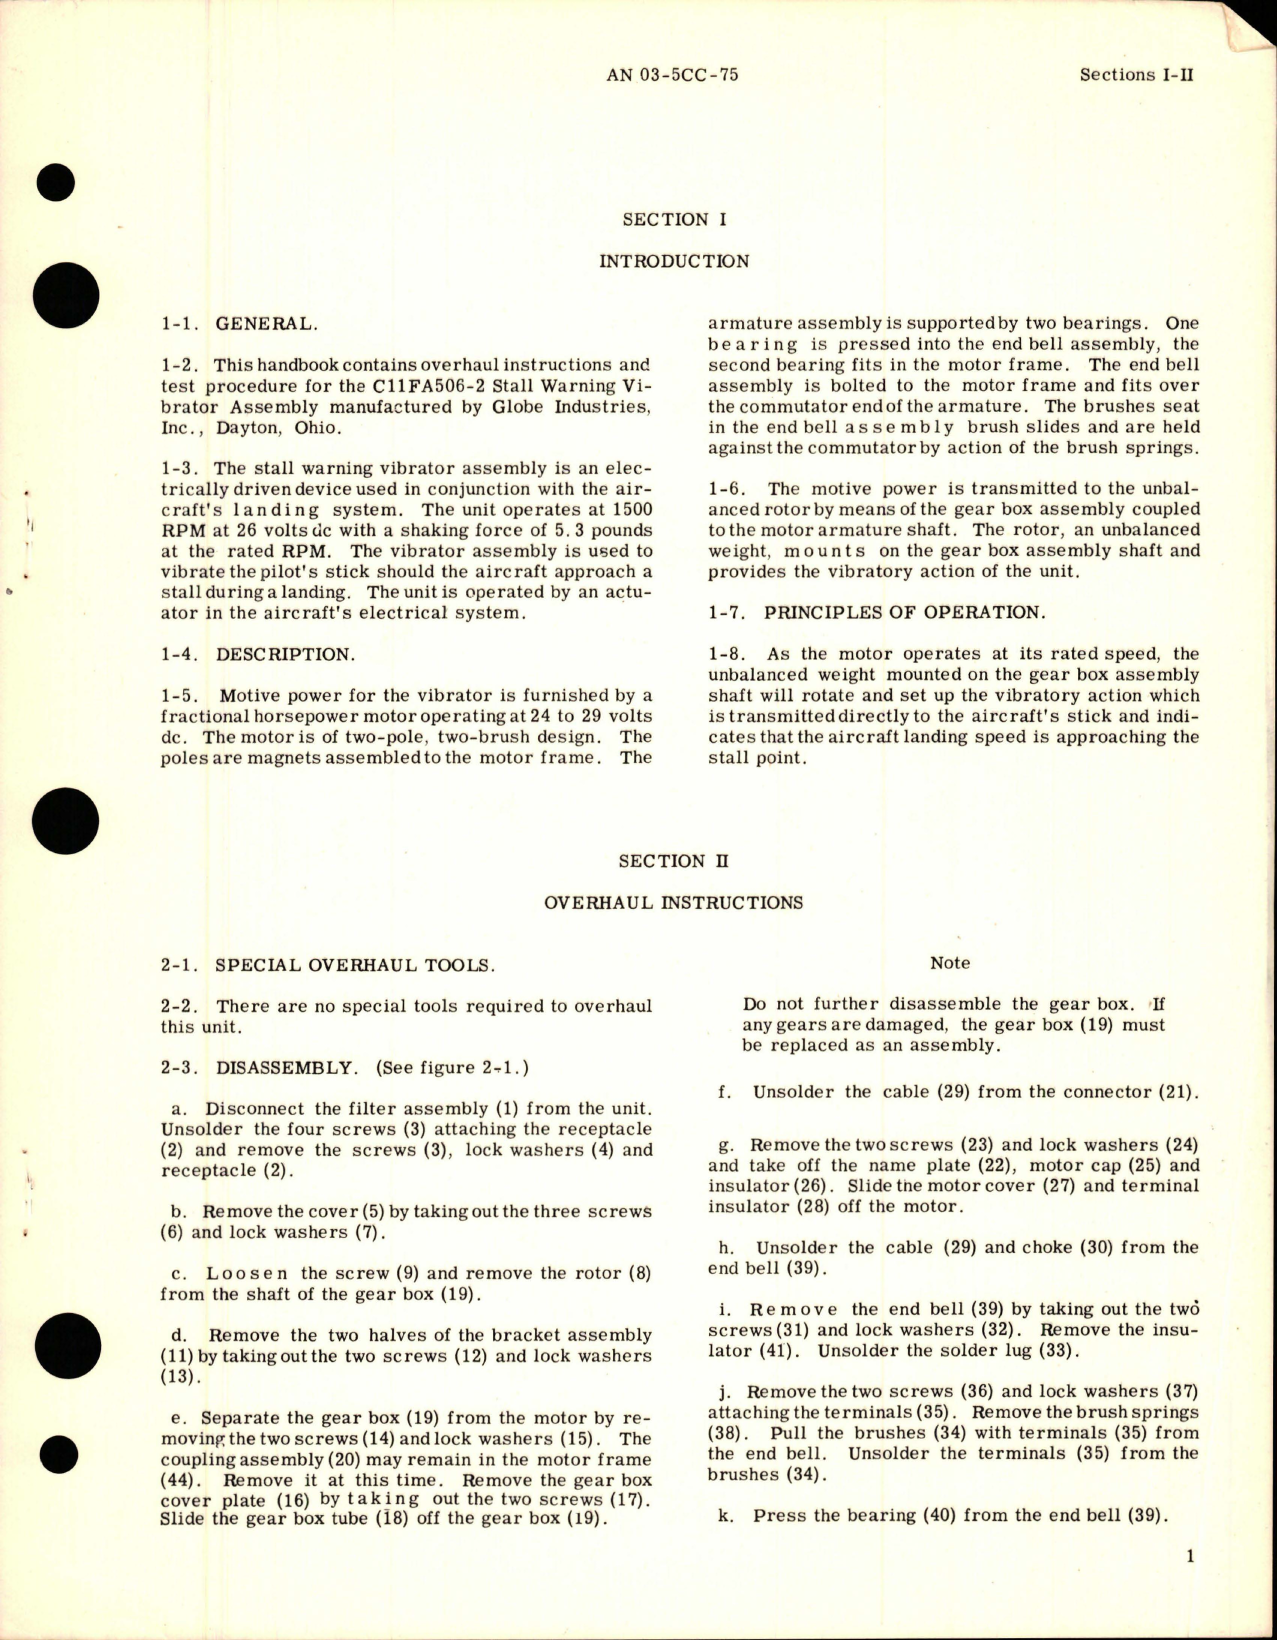 Sample page 5 from AirCorps Library document: Overhaul Instructions for Stall Warning Vibrator Assembly - Model C11FA506-2 